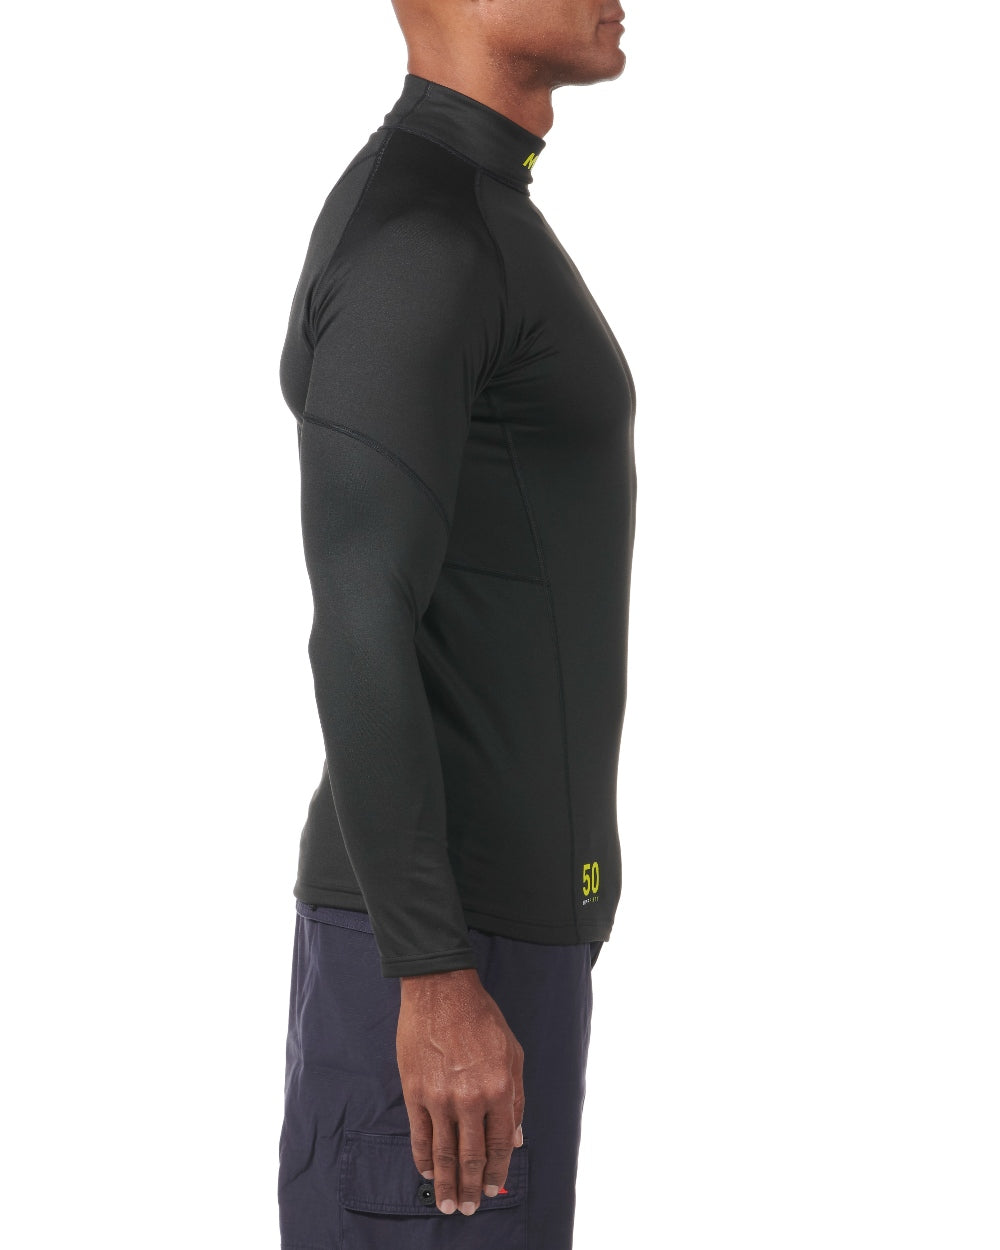 Black coloured Musto Mens Hydrothermal Top 2.0 on white background 